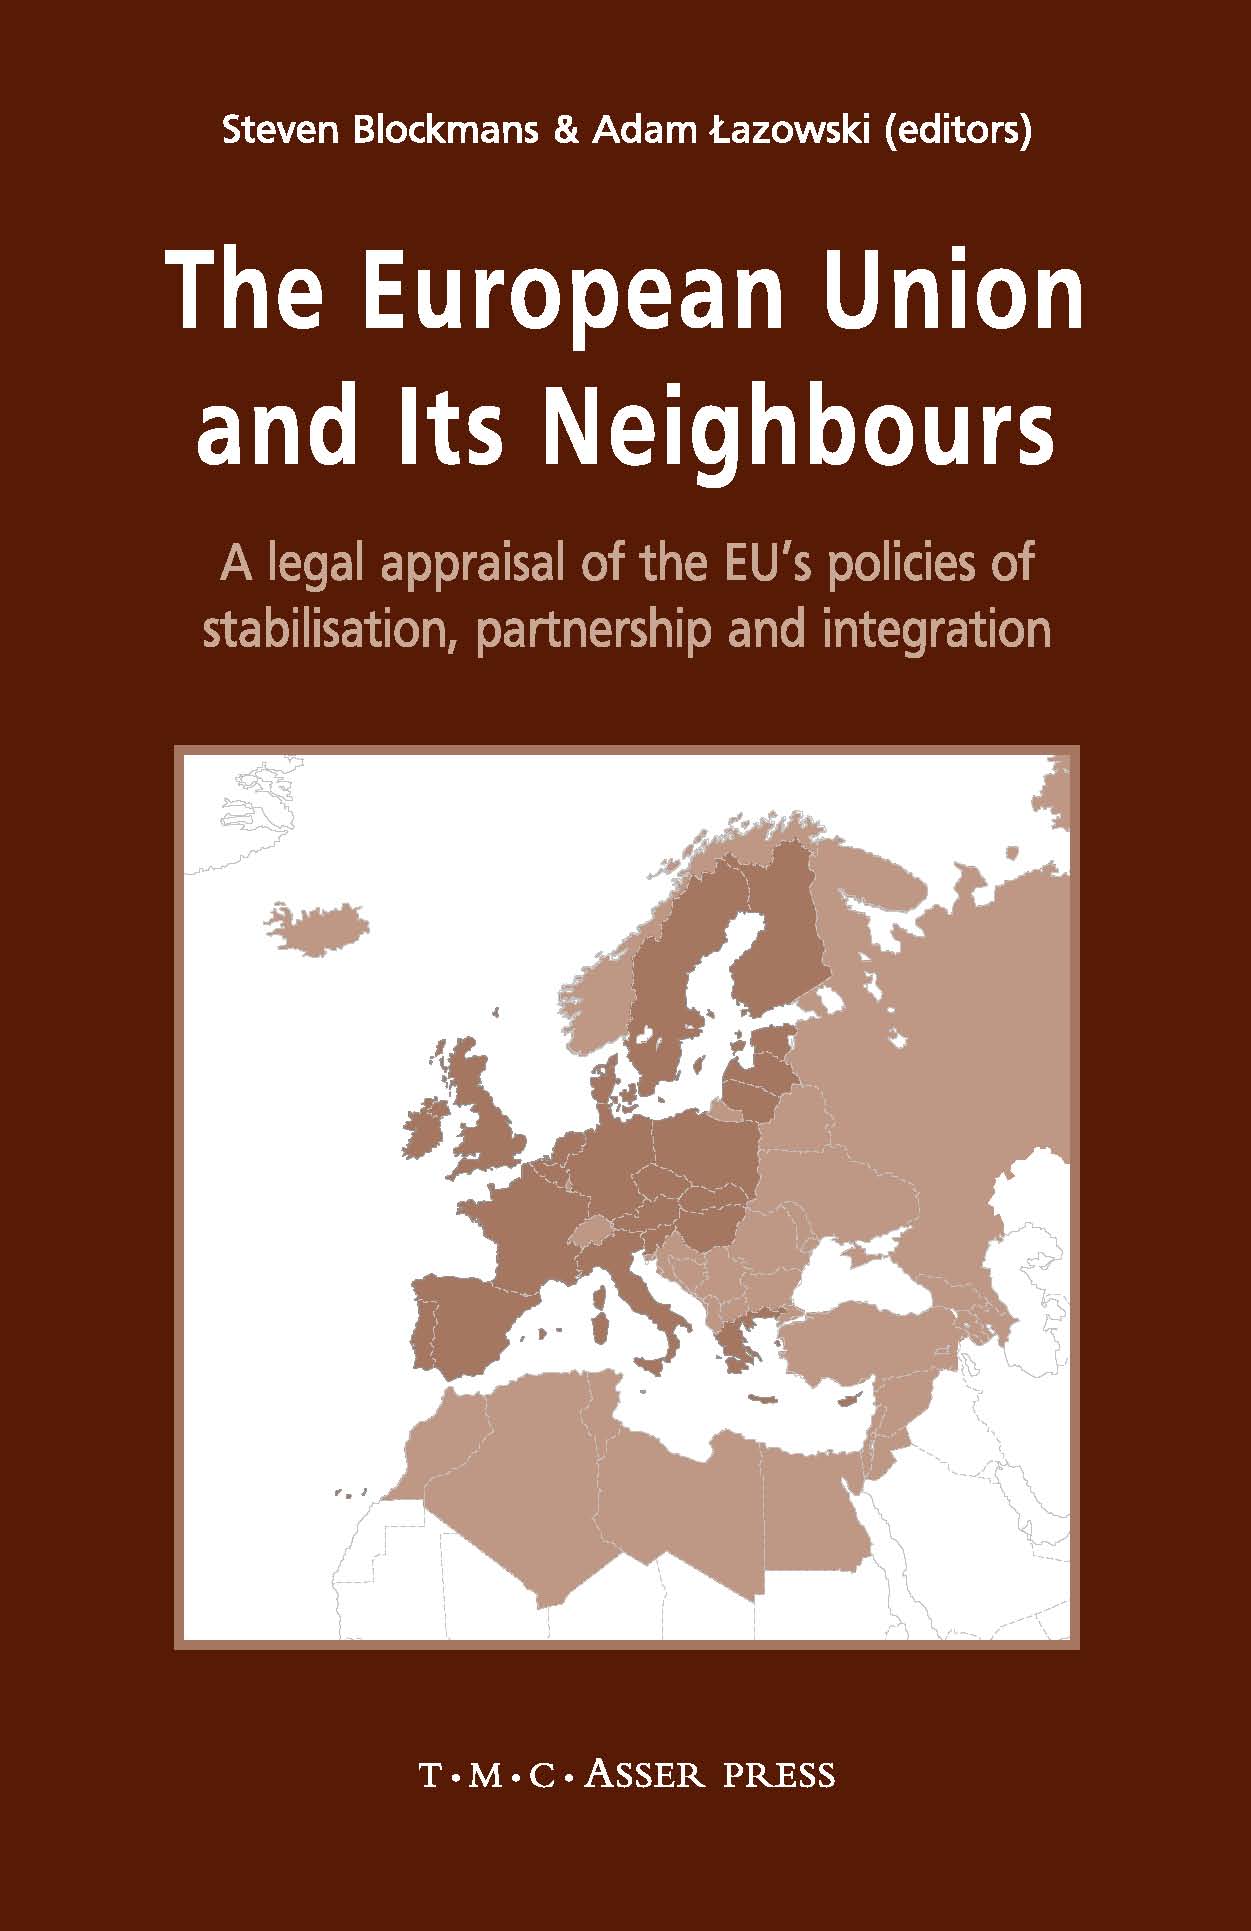 The European Union and its Neighbours - A Legal Appraisal of the EU's Policies of Stabilisation, Partnership and Integration